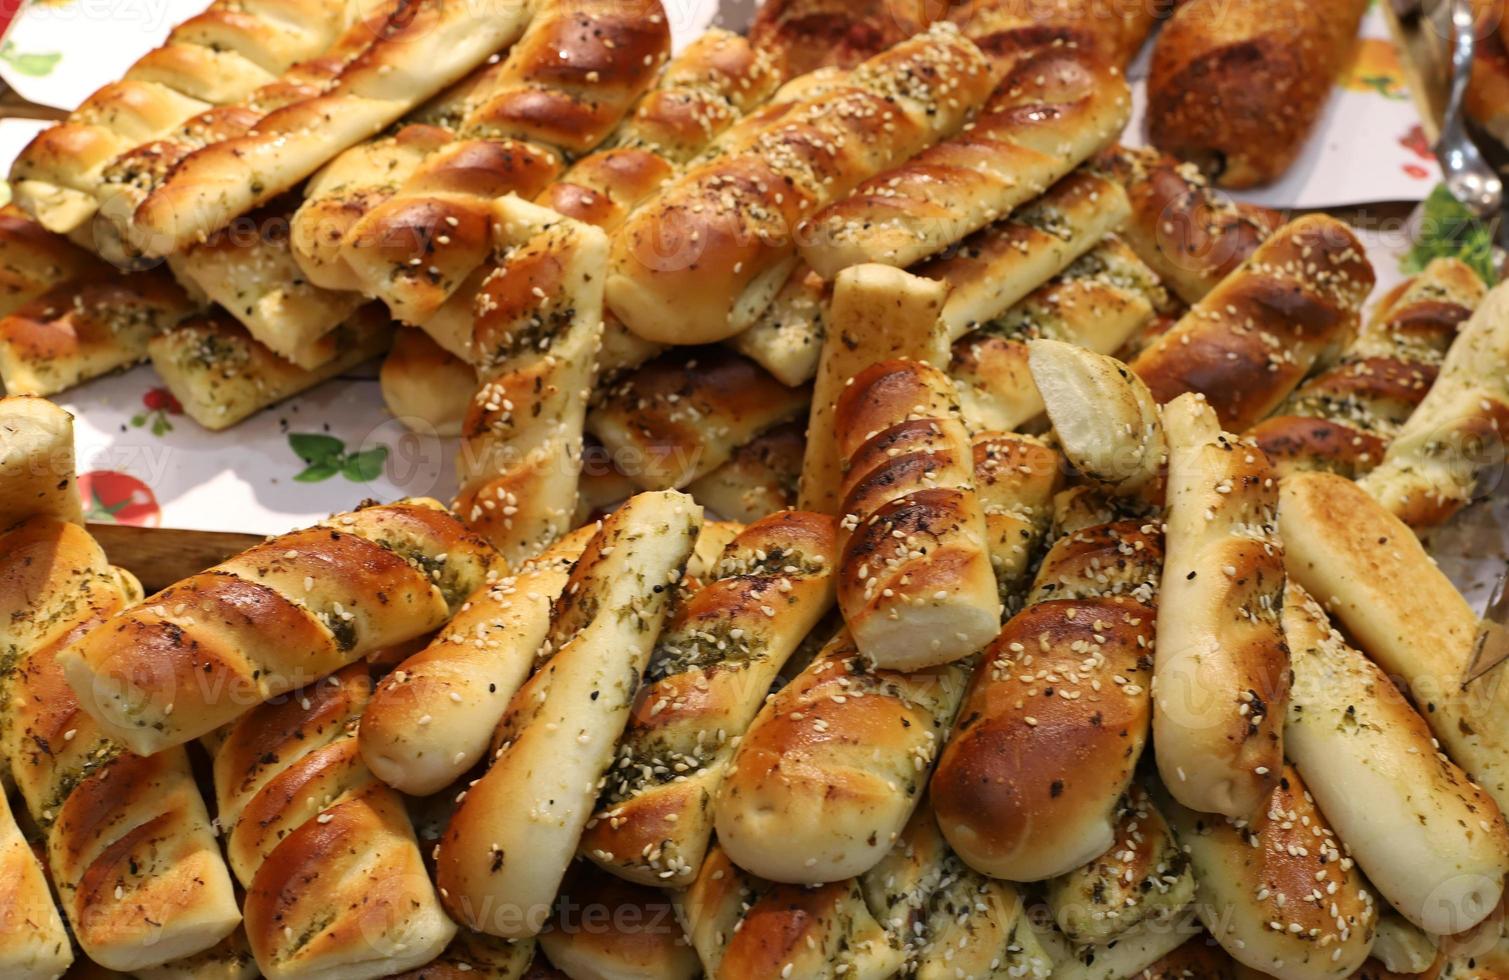 Bread and bakery products in Israel. photo